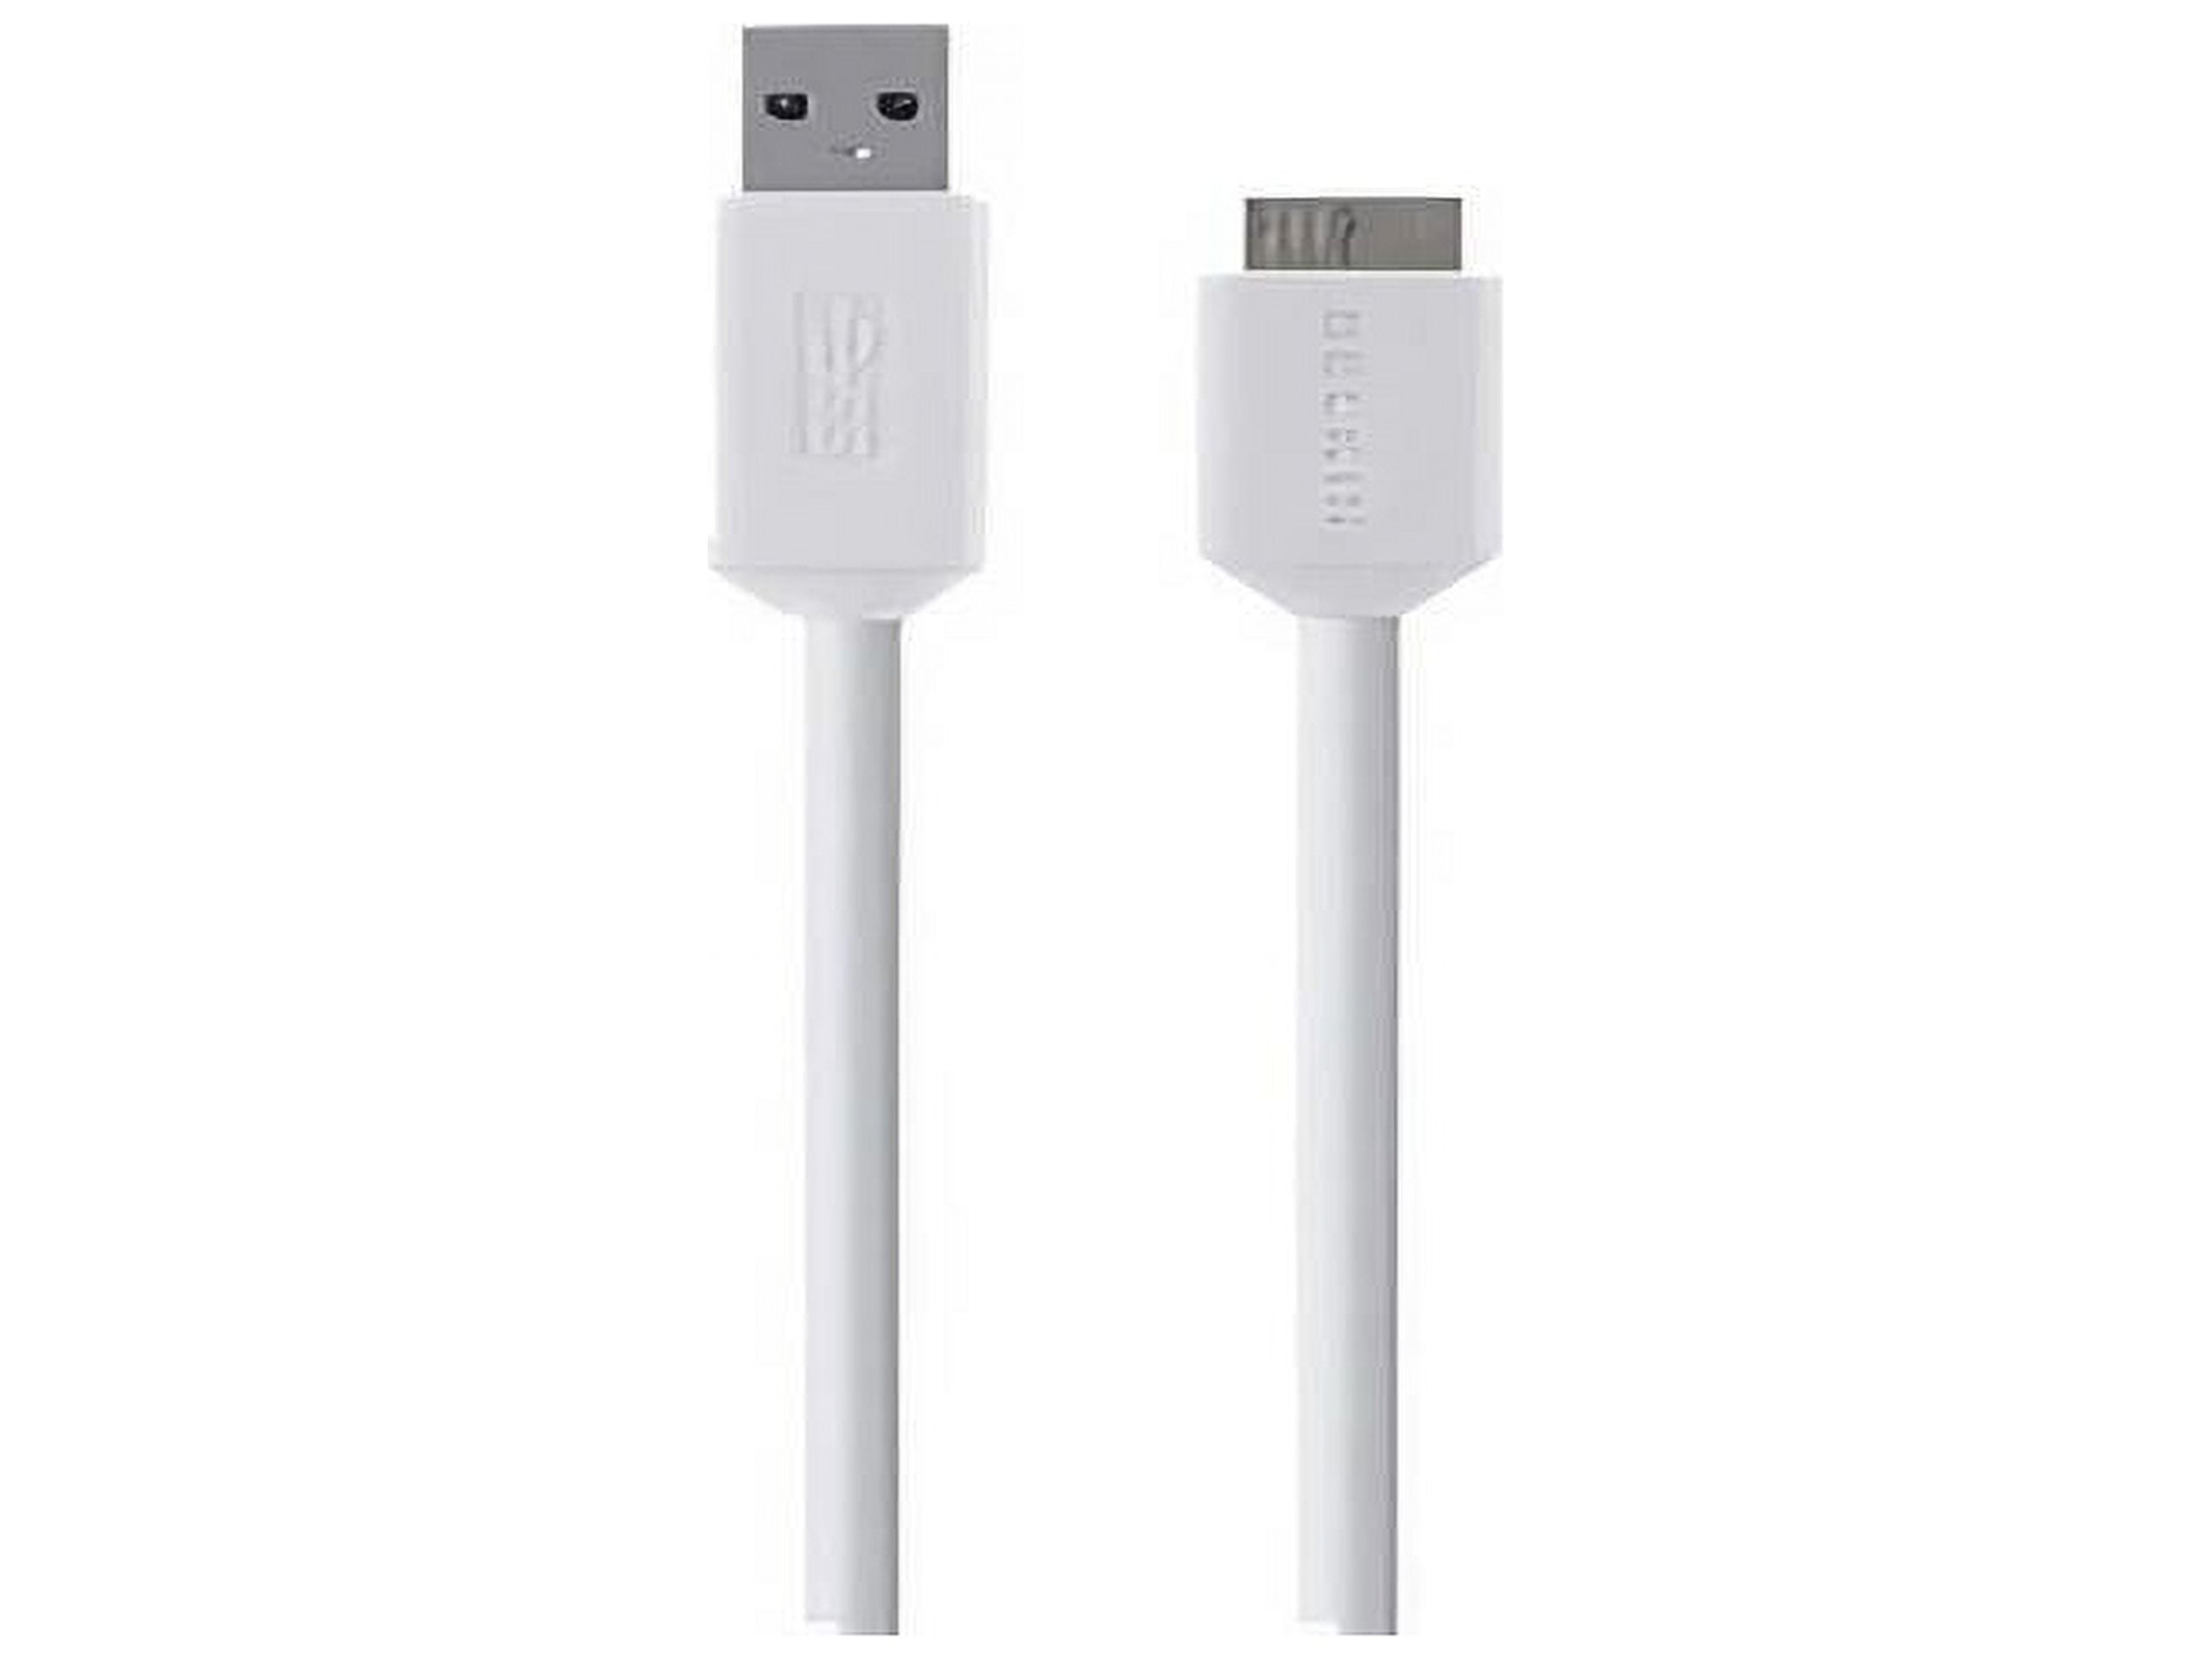 Belkin SuperSpeed USB 3.0 Cable A to Micro-B - USB cable - USB Type A to  Micro-USB Type B - 3 ft - F3U166B03 - USB Cables 